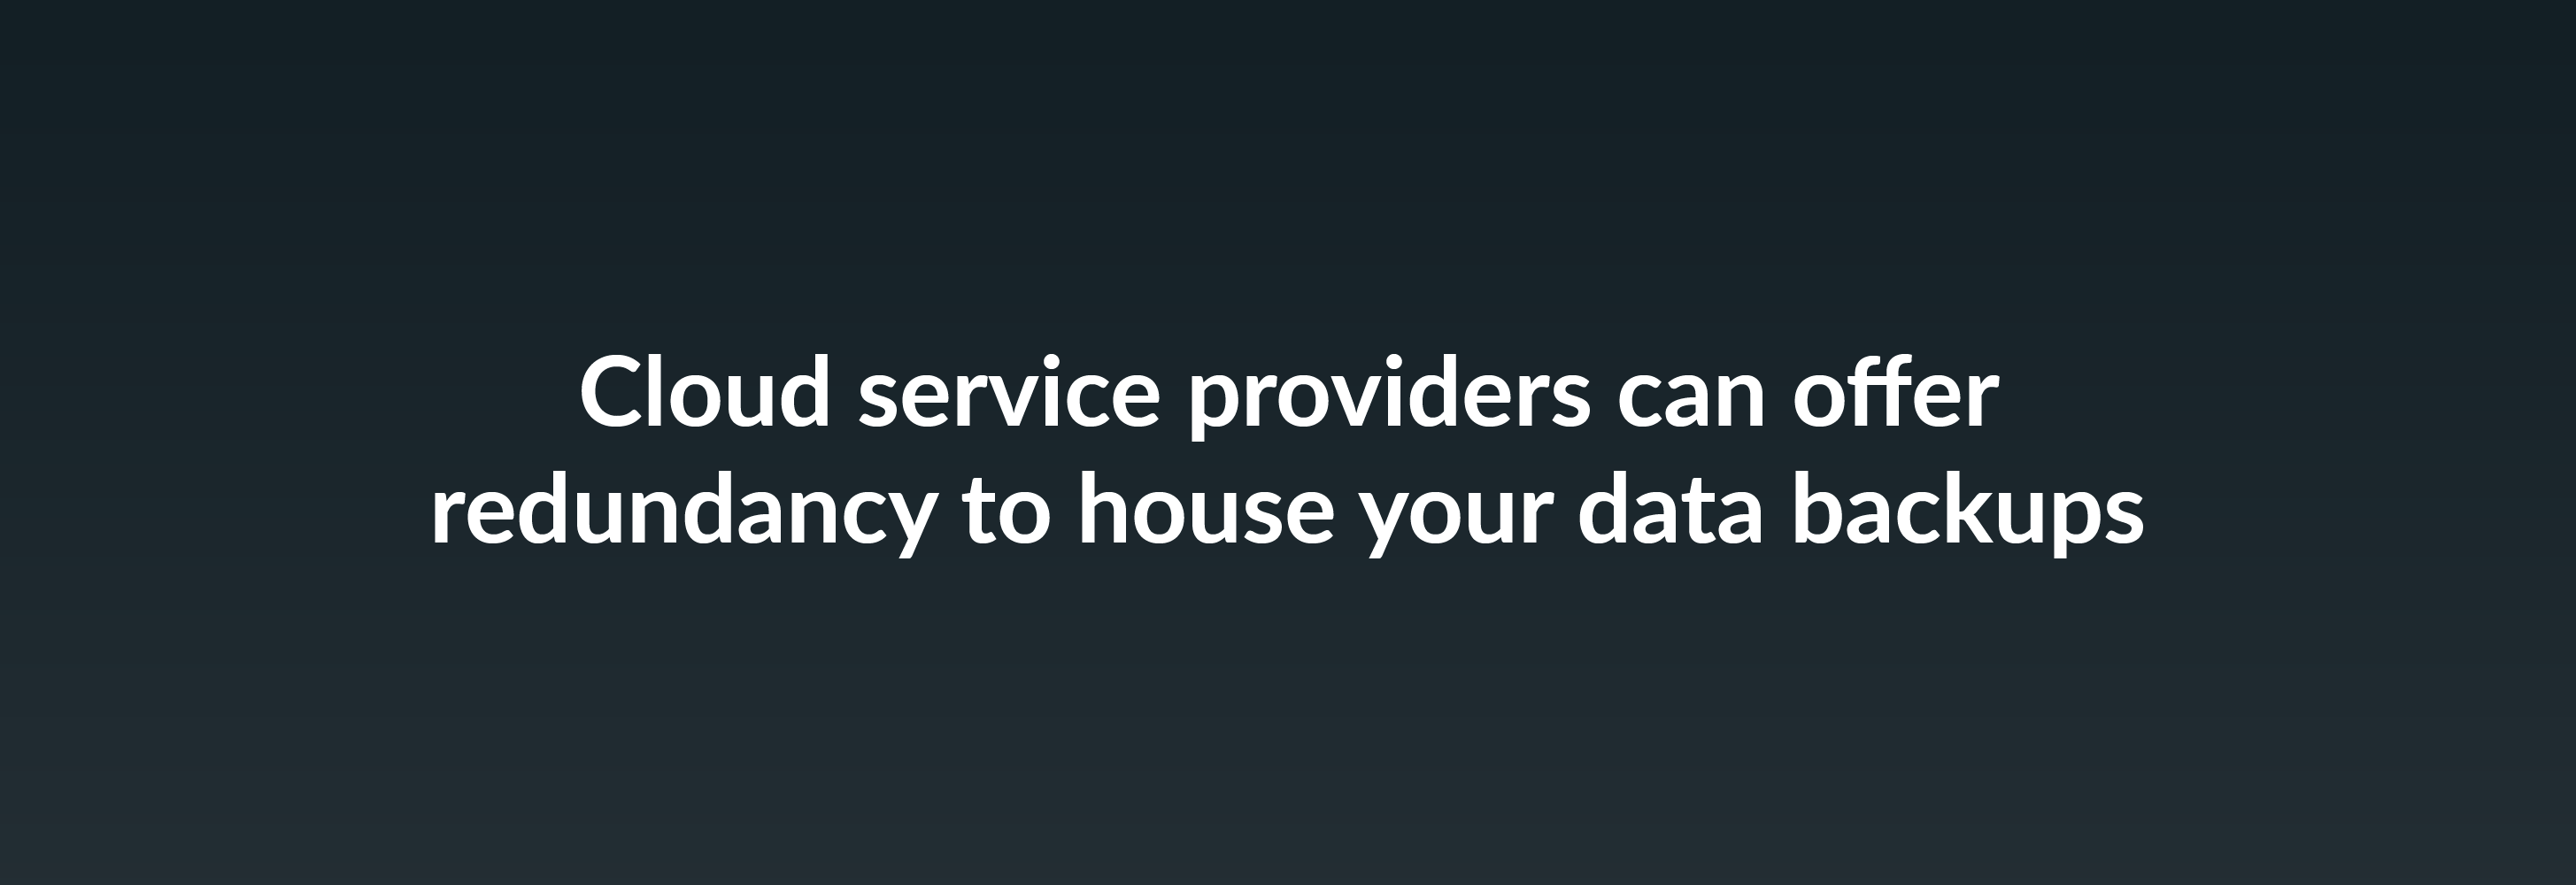 Cloud service providers can offer redundancy to house your data backups